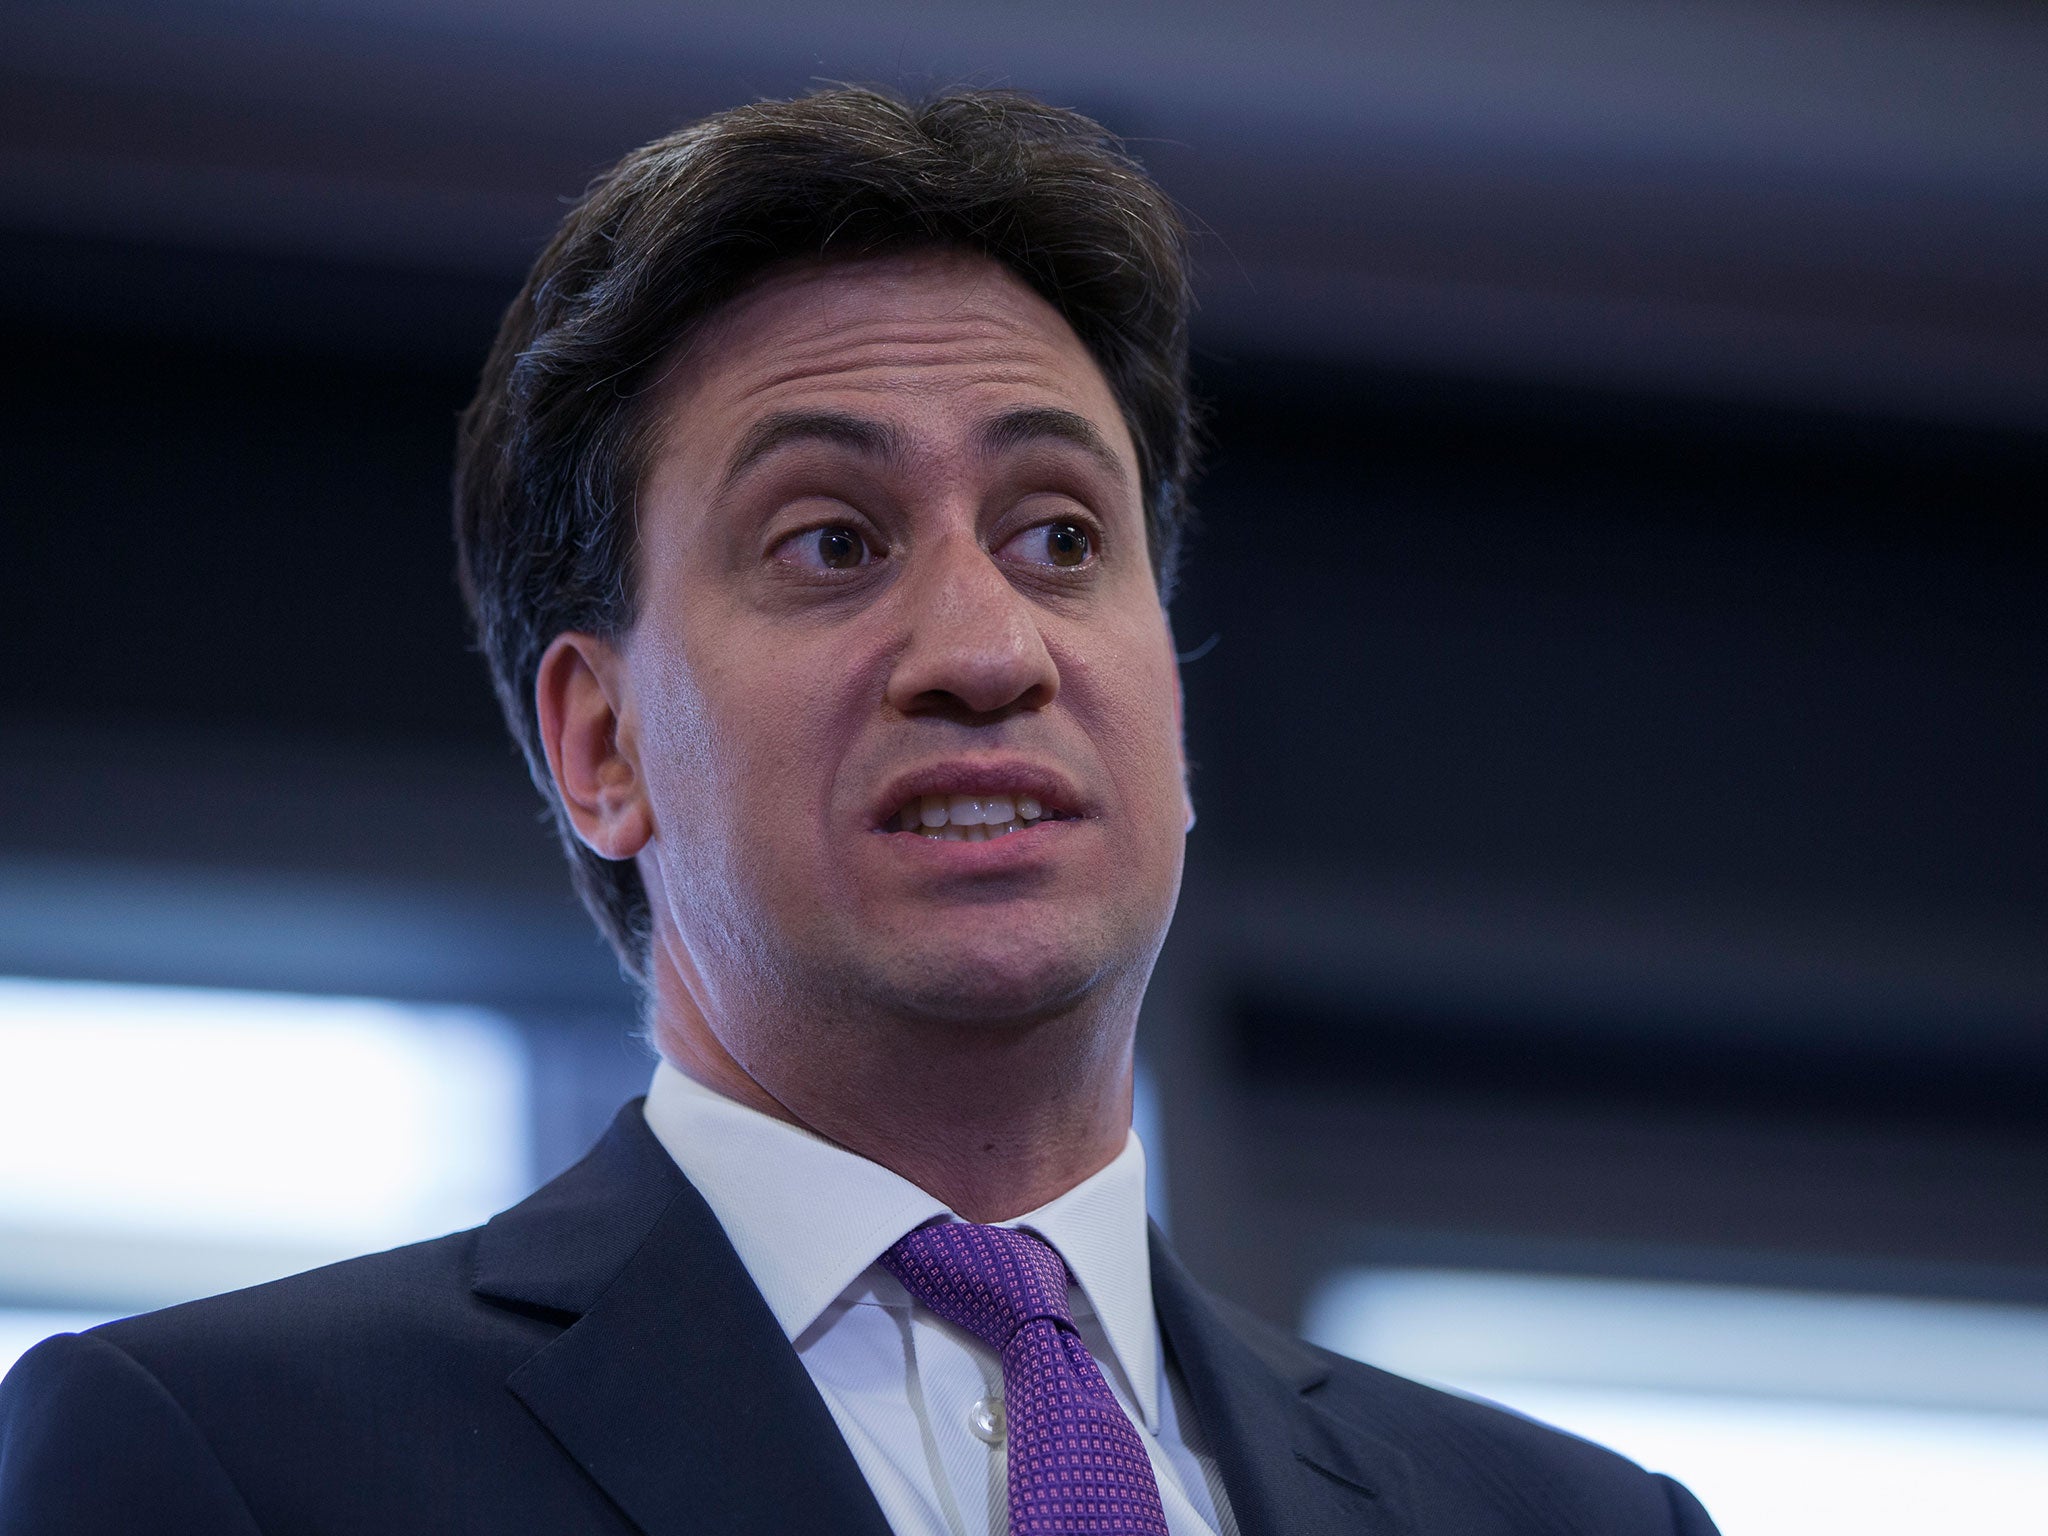 Ed Miliband will admit that the party could not throw money at public services to improve them